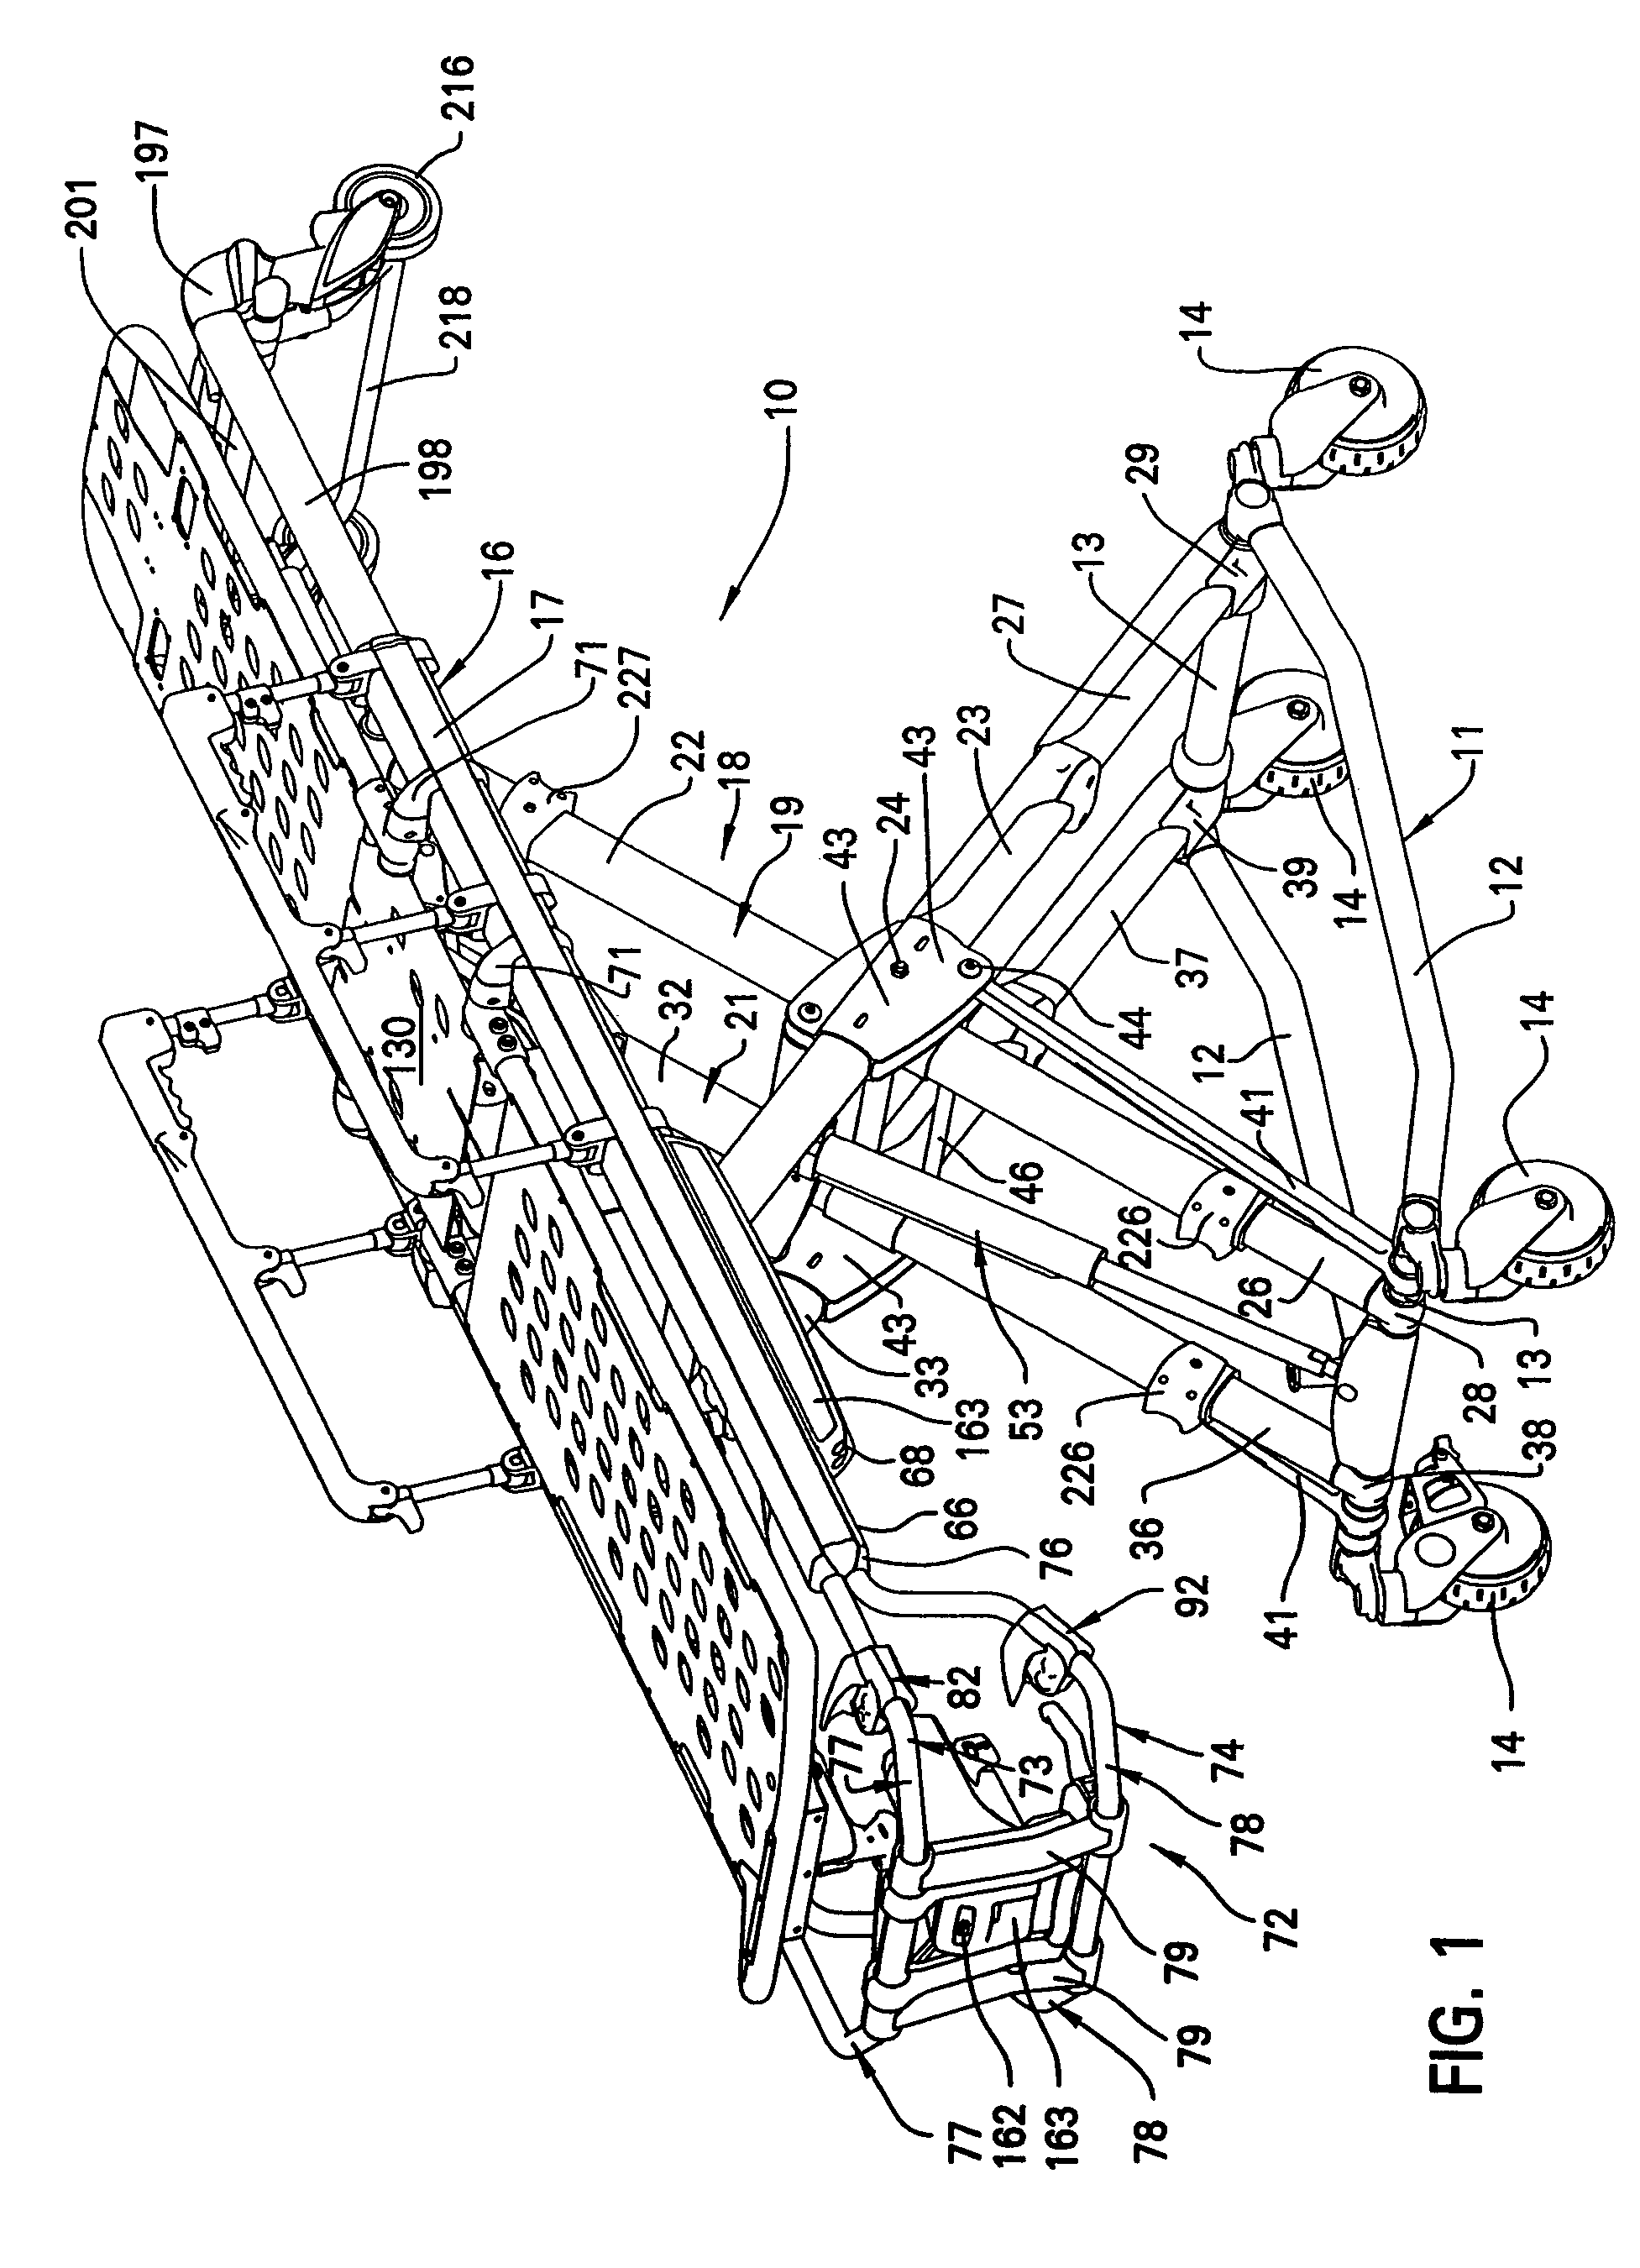 Ambulance cot and hydraulic elevating mechanism therefor